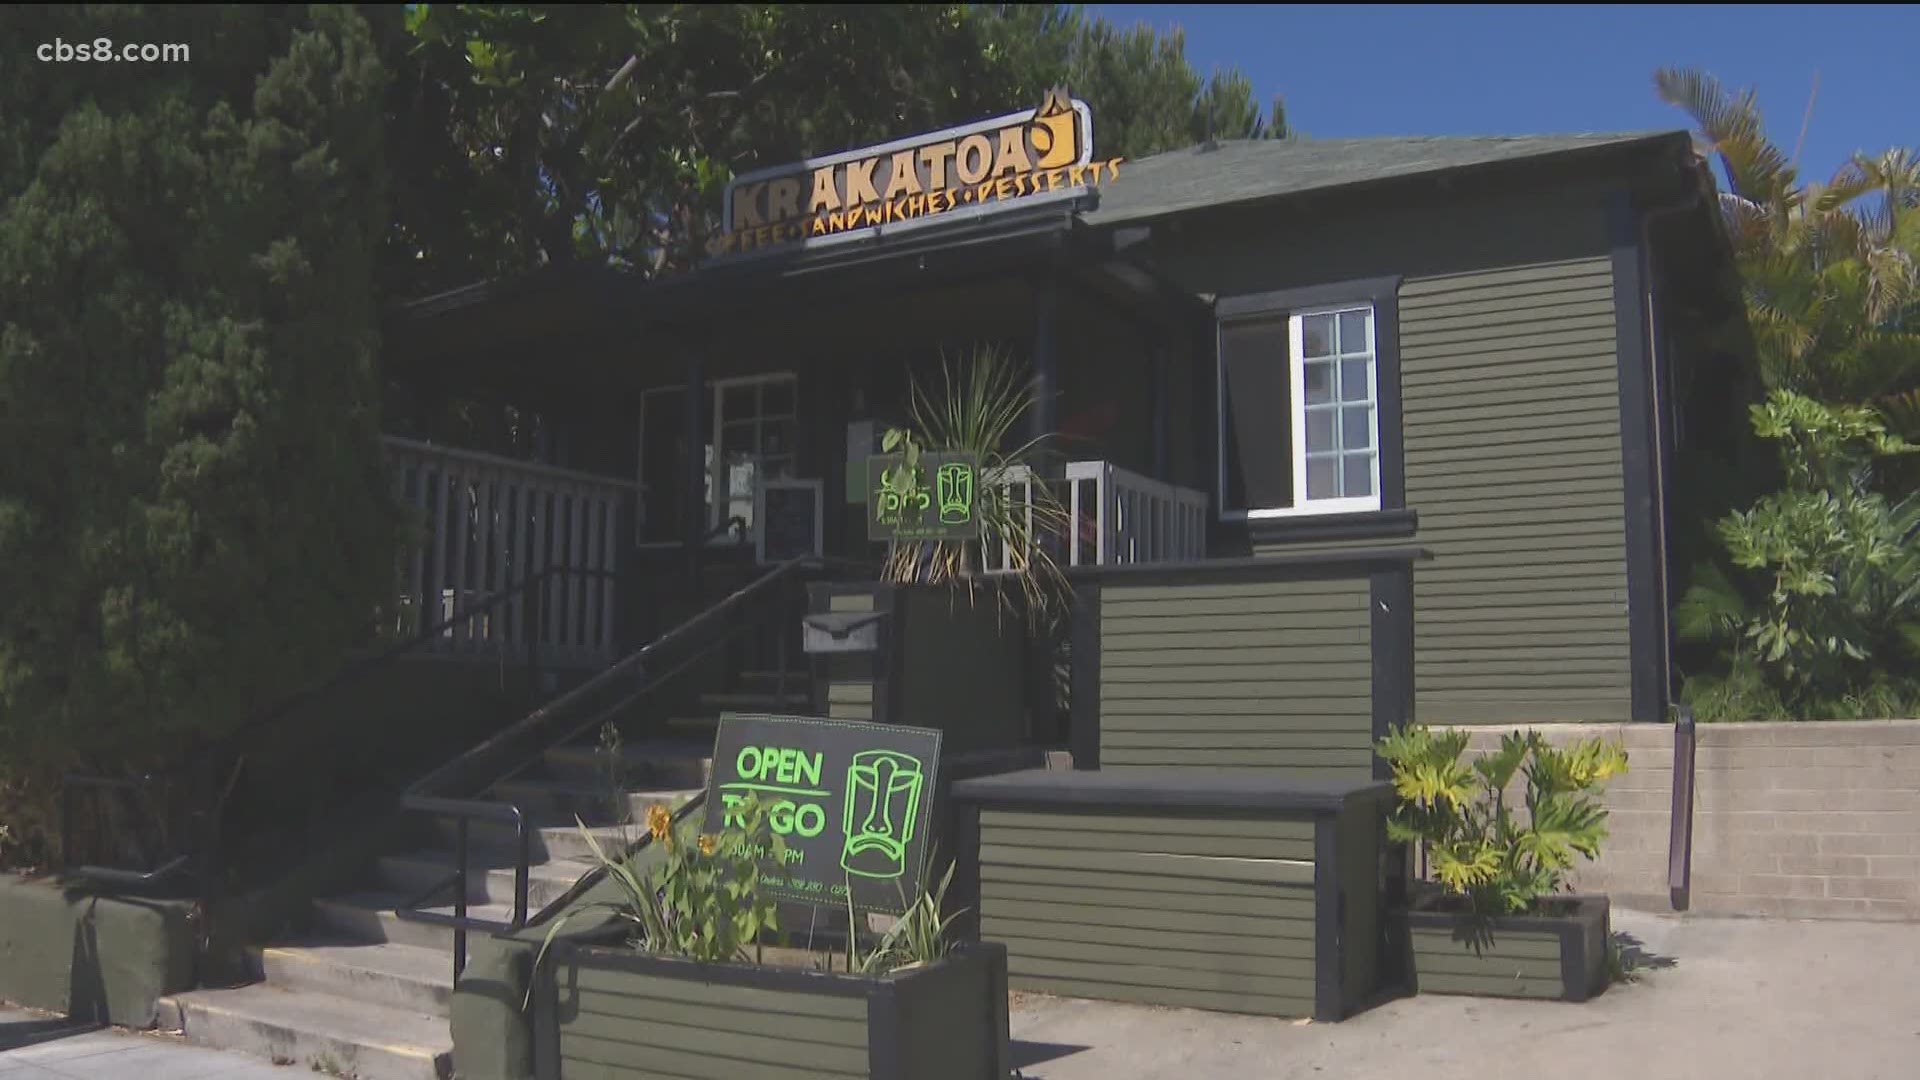 As soon as Governor Newsom and the county give the go ahead, places like Krakatoa in Golden Hill will be ready to reopen.